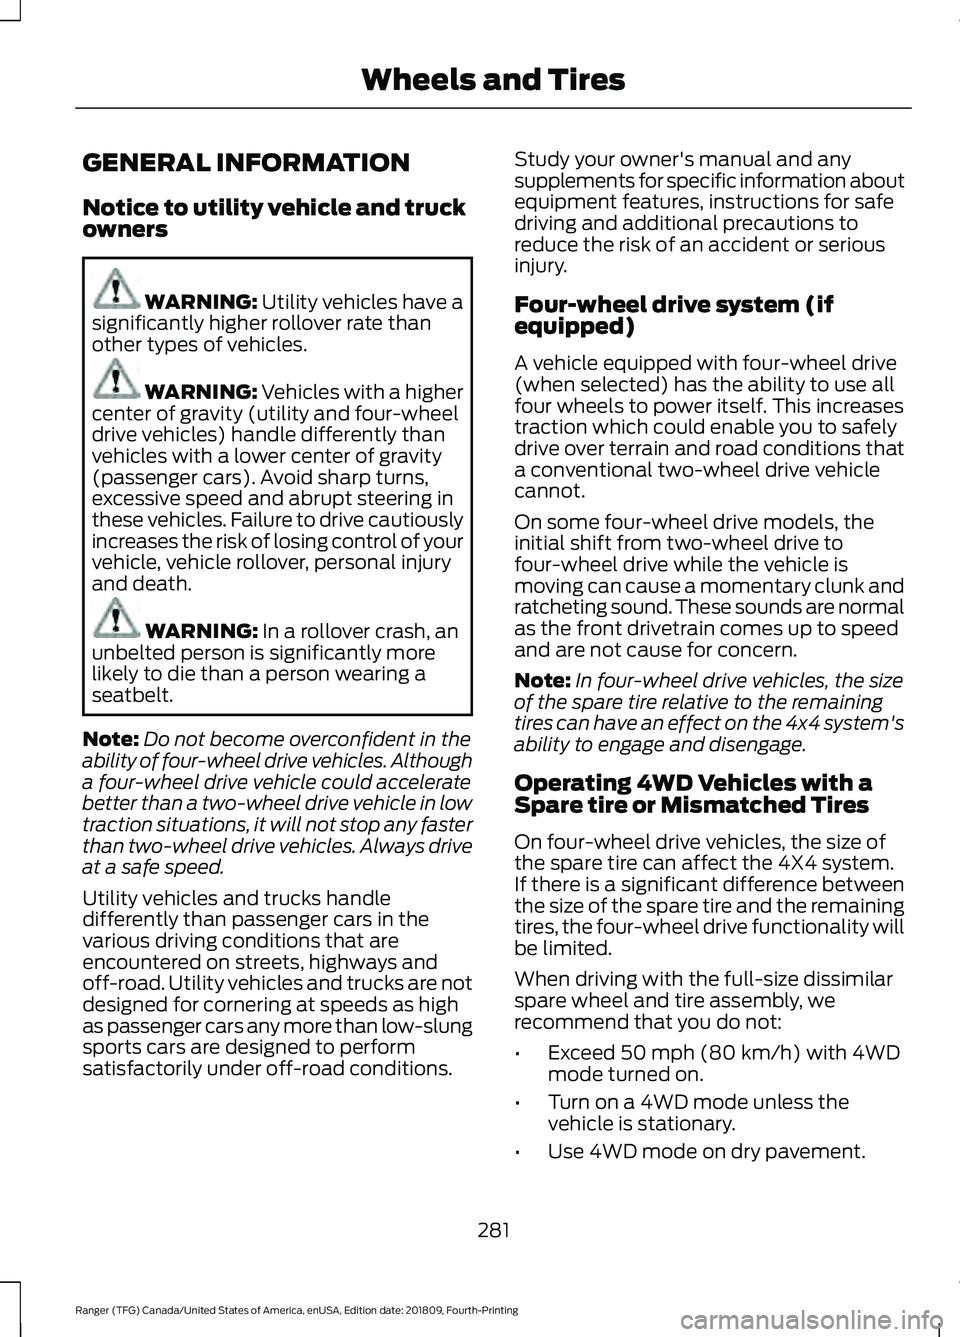 FORD RANGER 2019  Owners Manual GENERAL INFORMATION
Notice to utility vehicle and truck
owners
WARNING: Utility vehicles have a
significantly higher rollover rate than
other types of vehicles. WARNING: Vehicles with a higher
center 